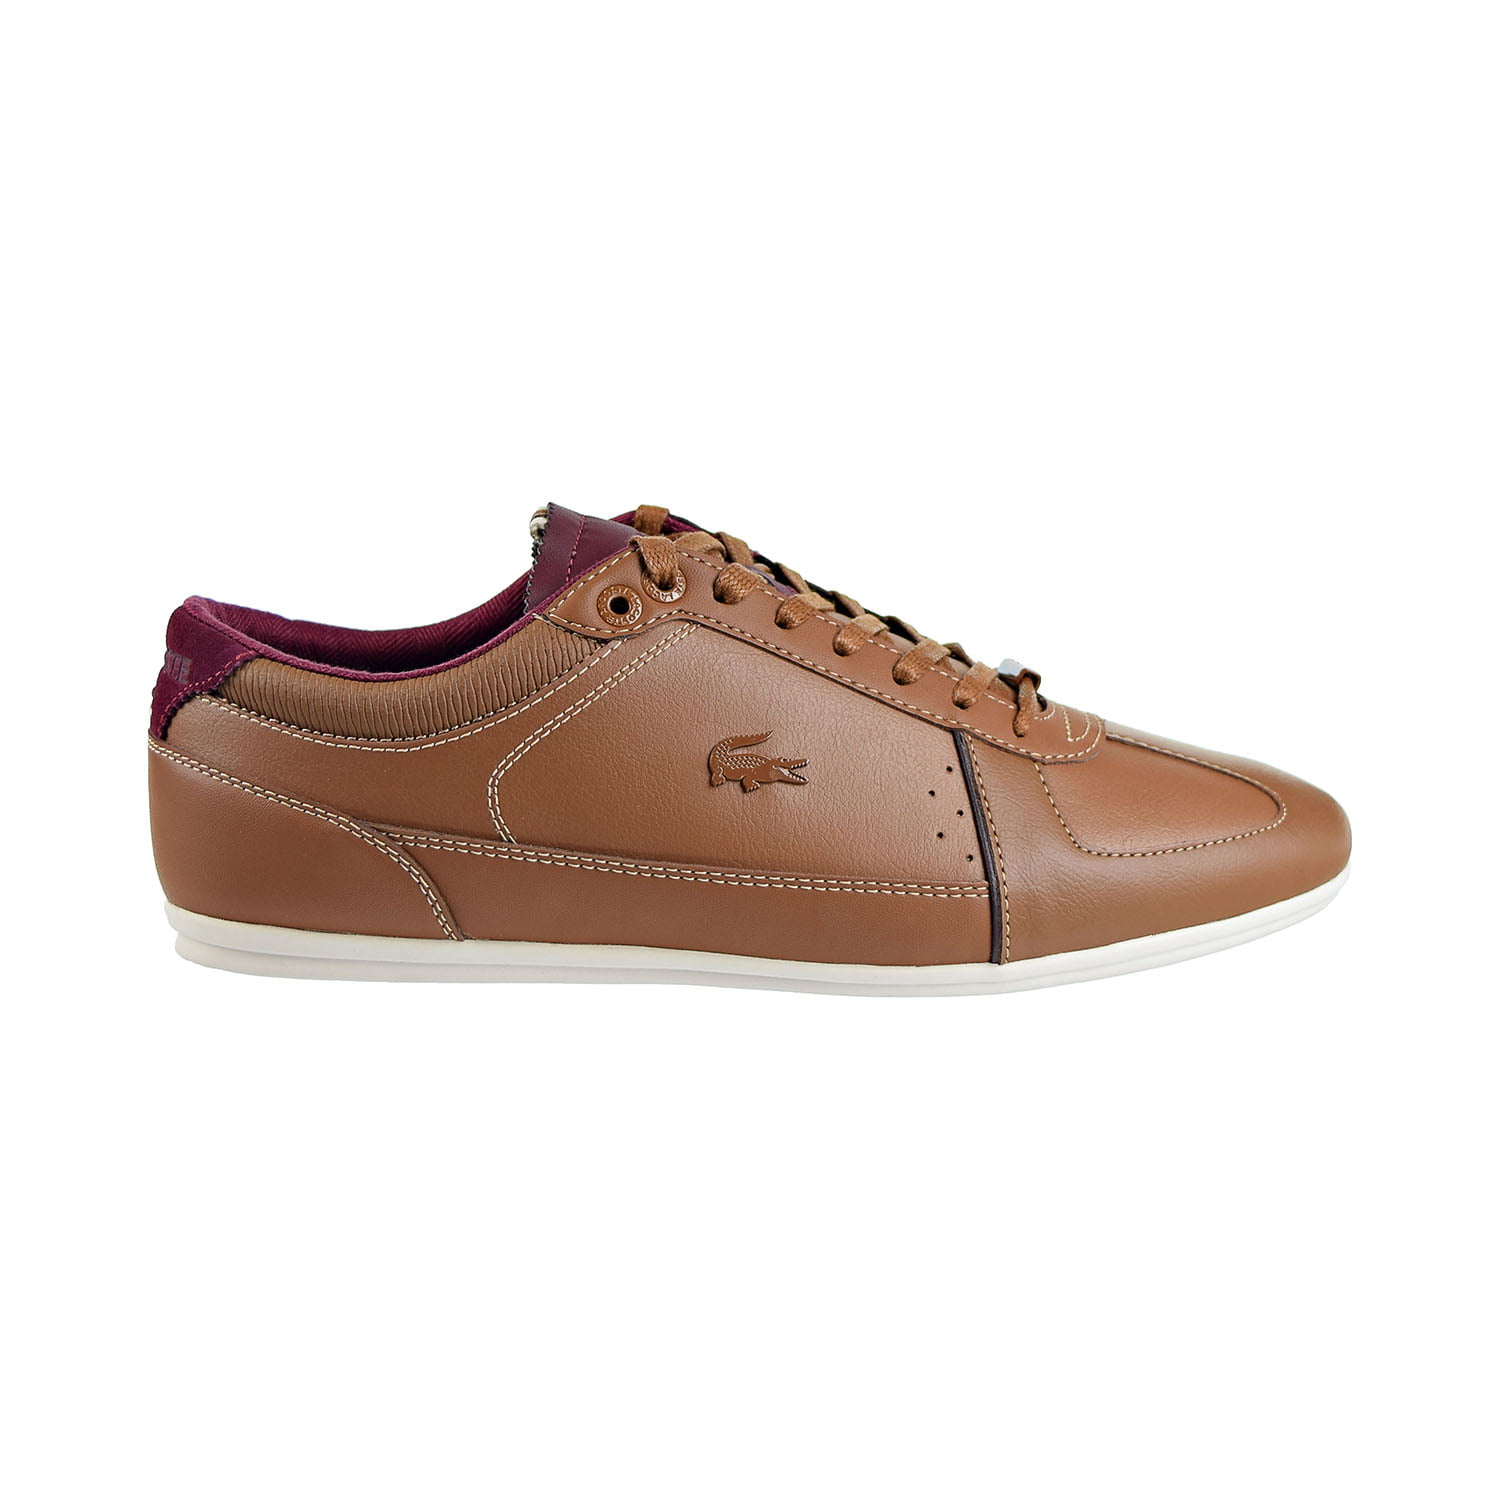 Lacoste 318 2 Cam Men's Shoes Brown/Dark Red 7-36cam0024-br1 -